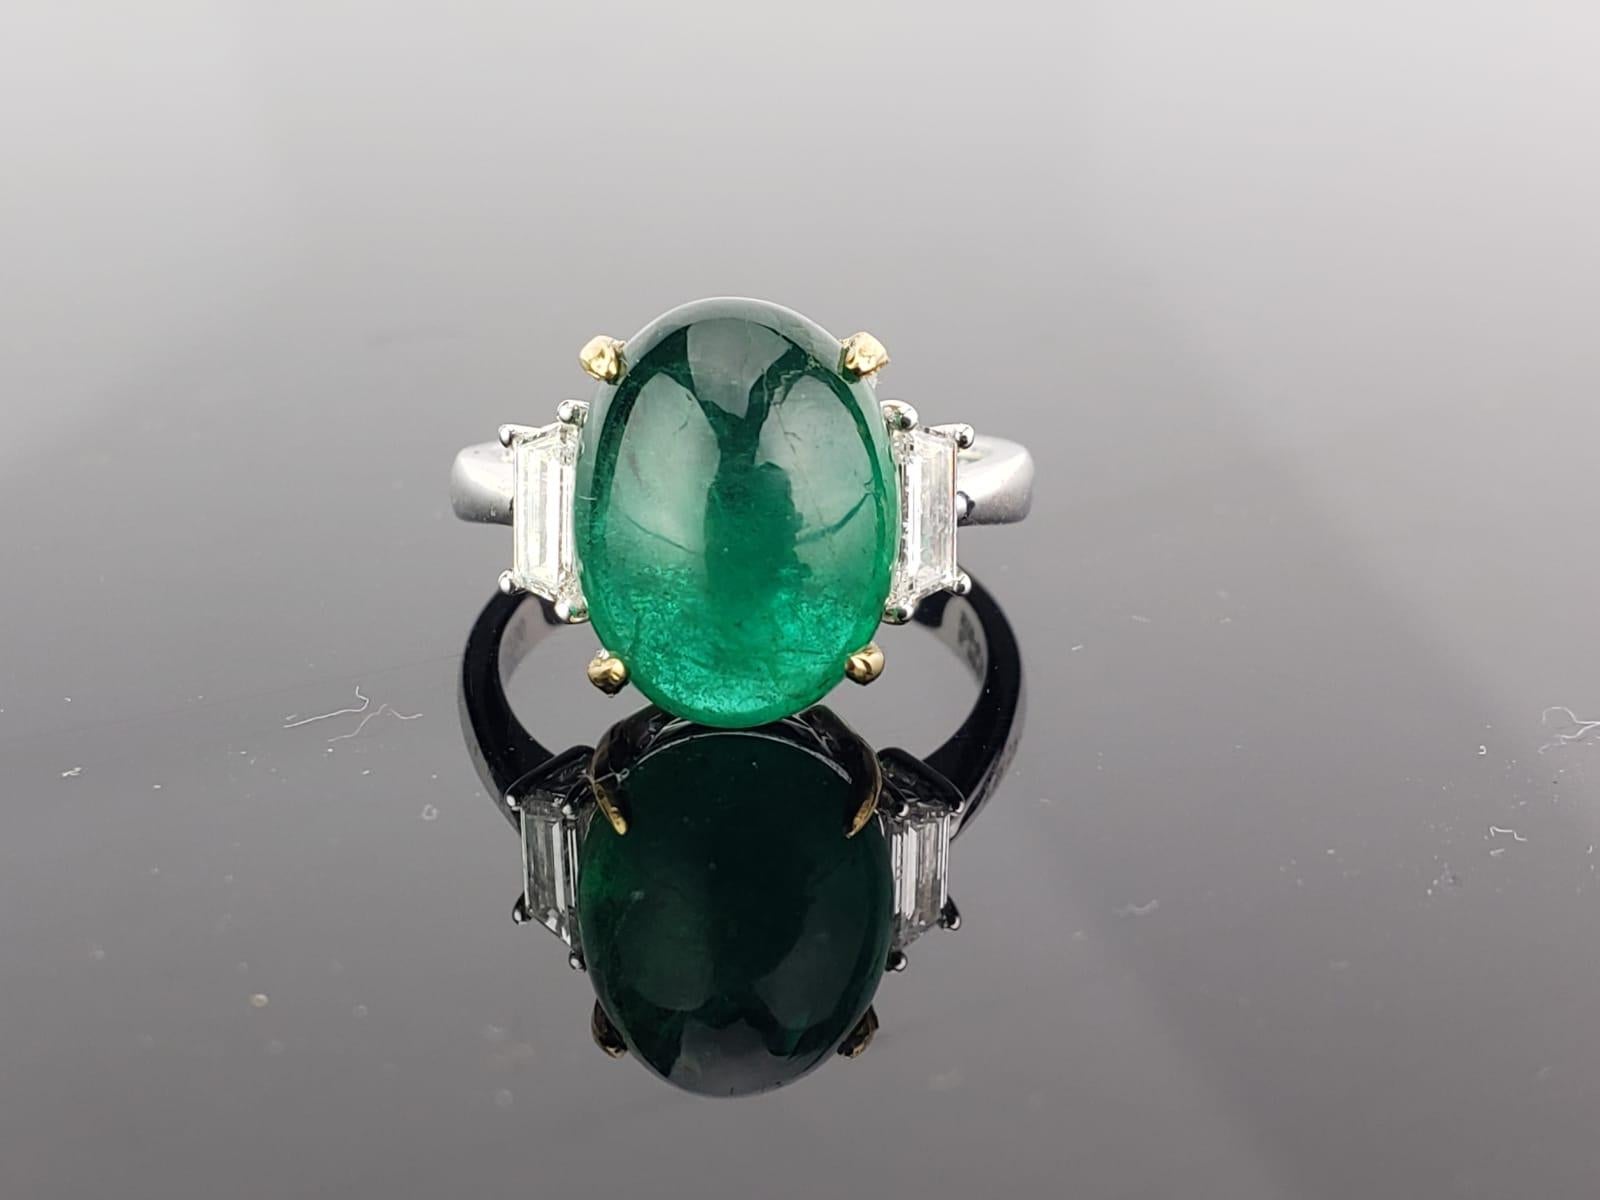 A beautiful three stone ring, with a 7.17 carat lustrous and transparent Zambian Emerald cabochon centre stone and 2 trapeze side stone diamonds; all set in 18K white gold. Currently a ring size US 6, but we can resize the ring for you without